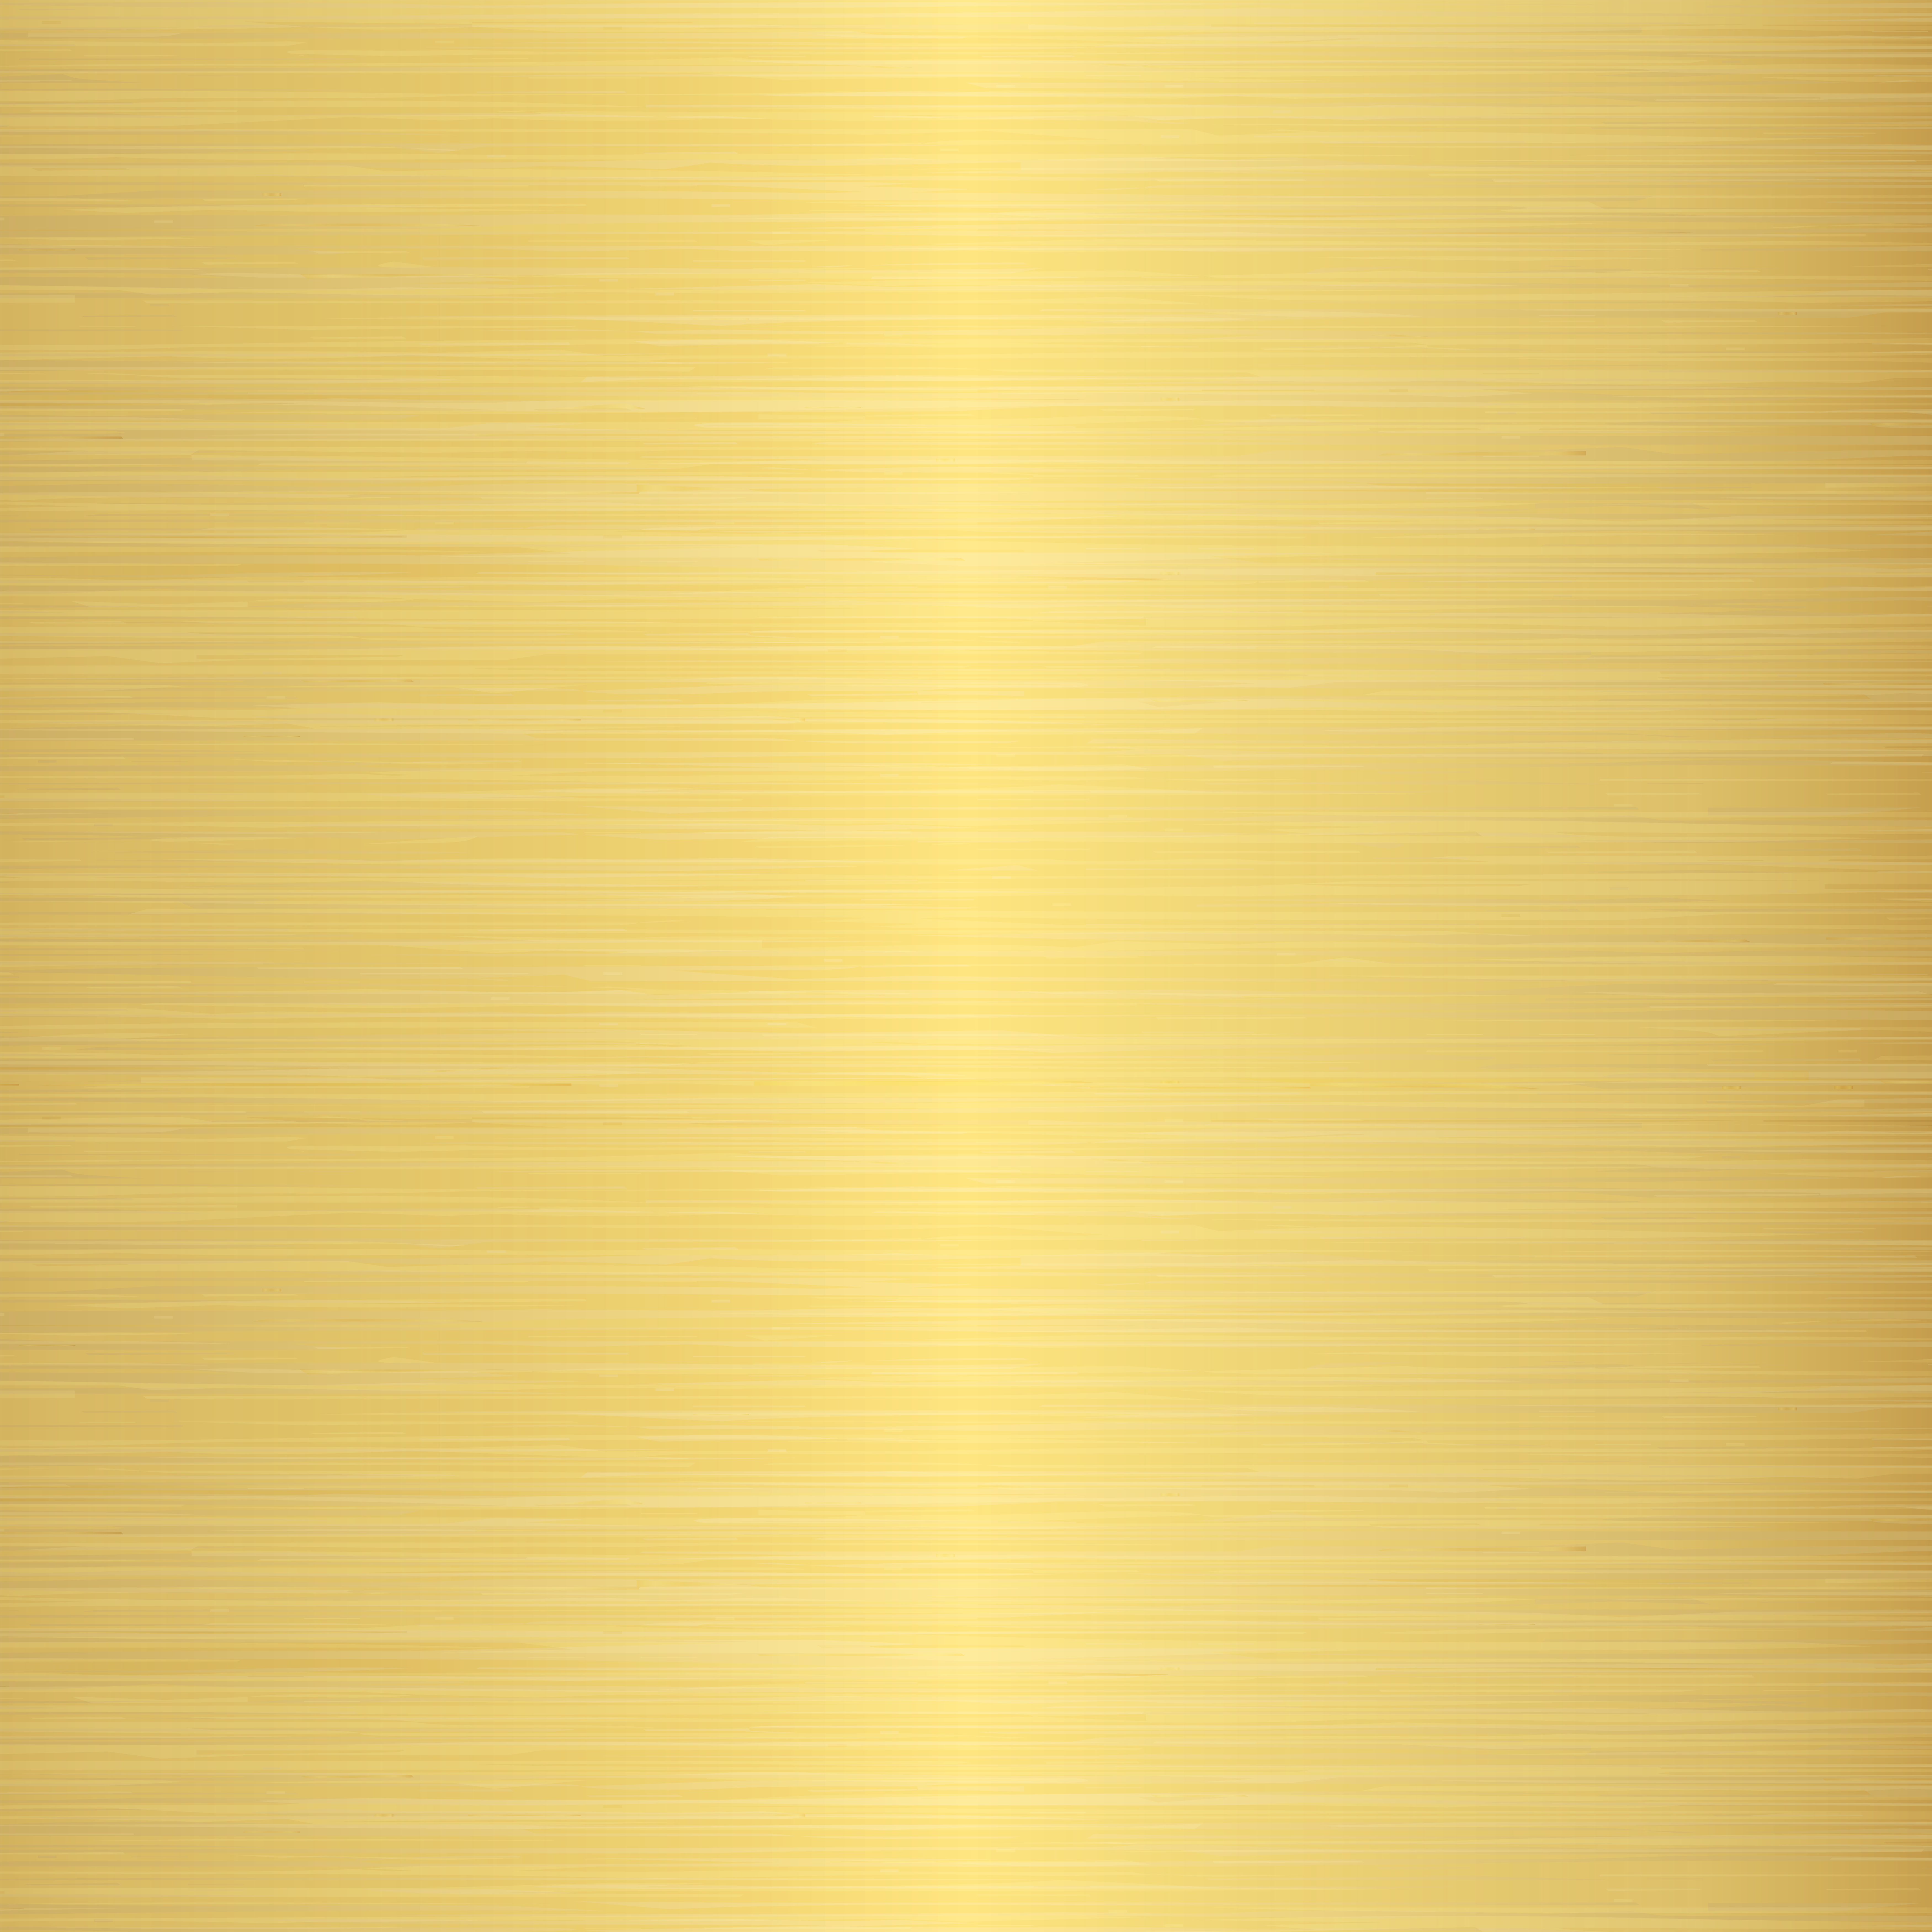 Gold Clipart Background.